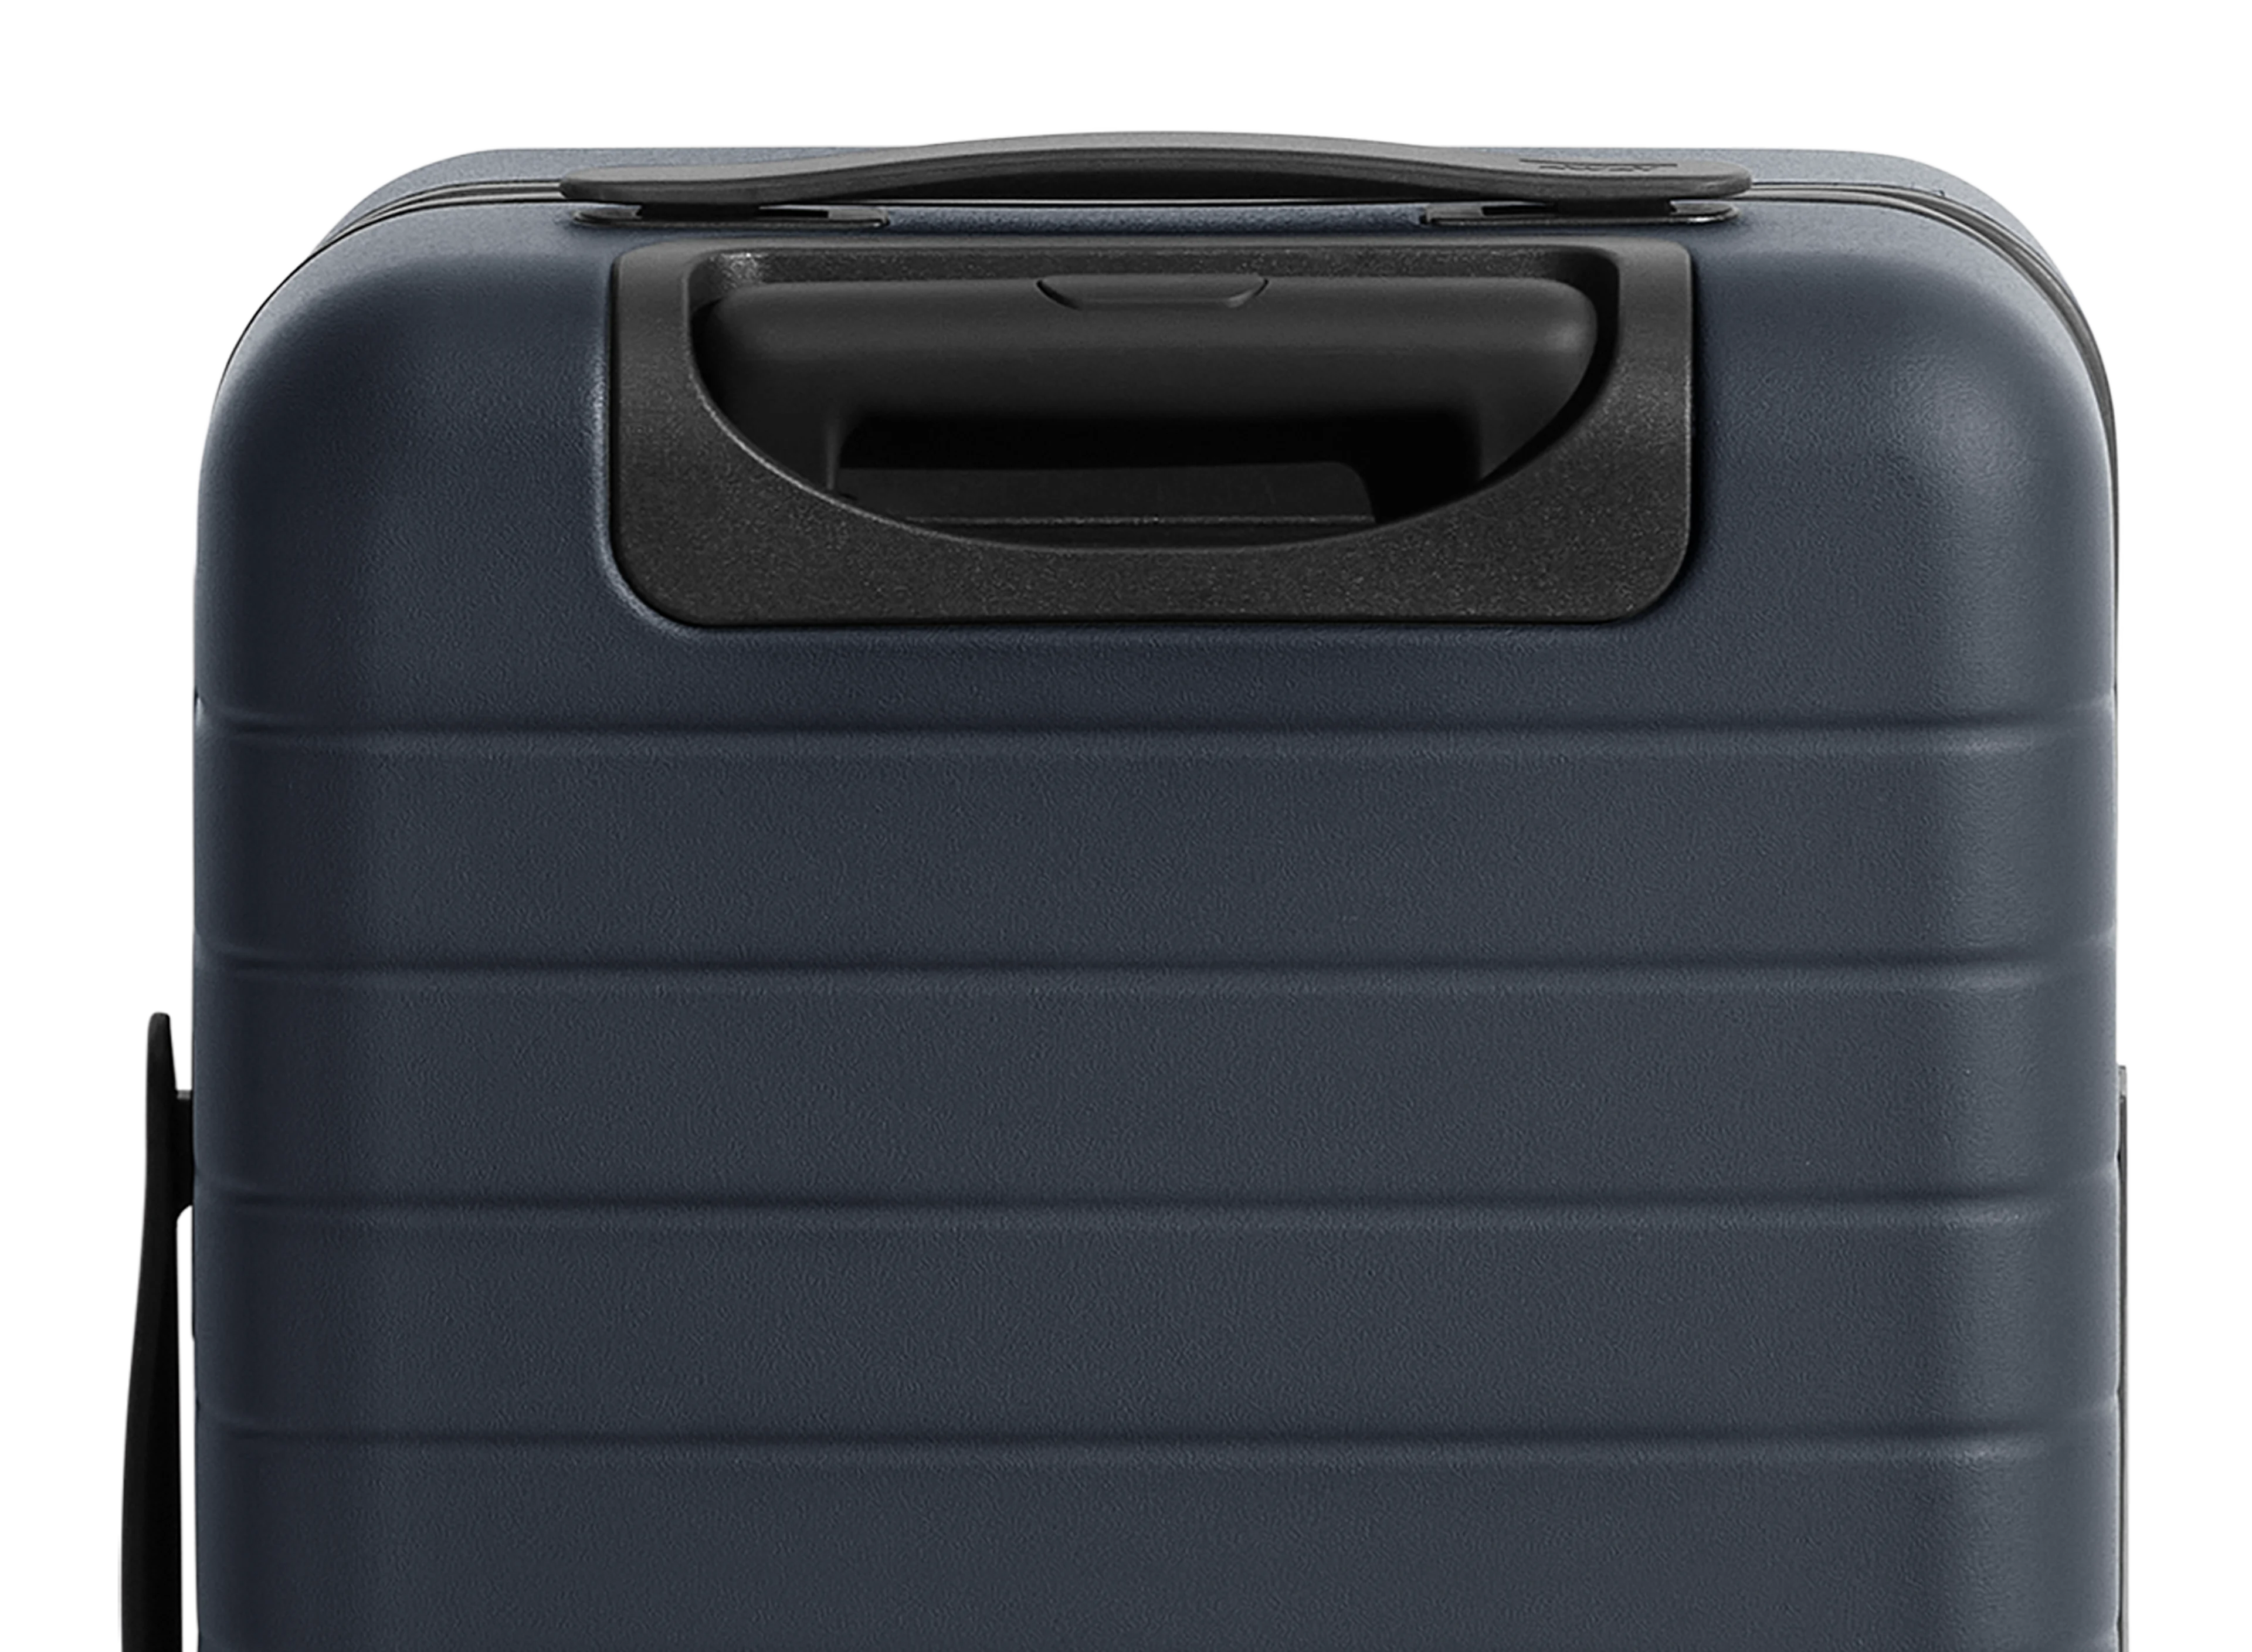 The Carry-On Flex in Navy Blue